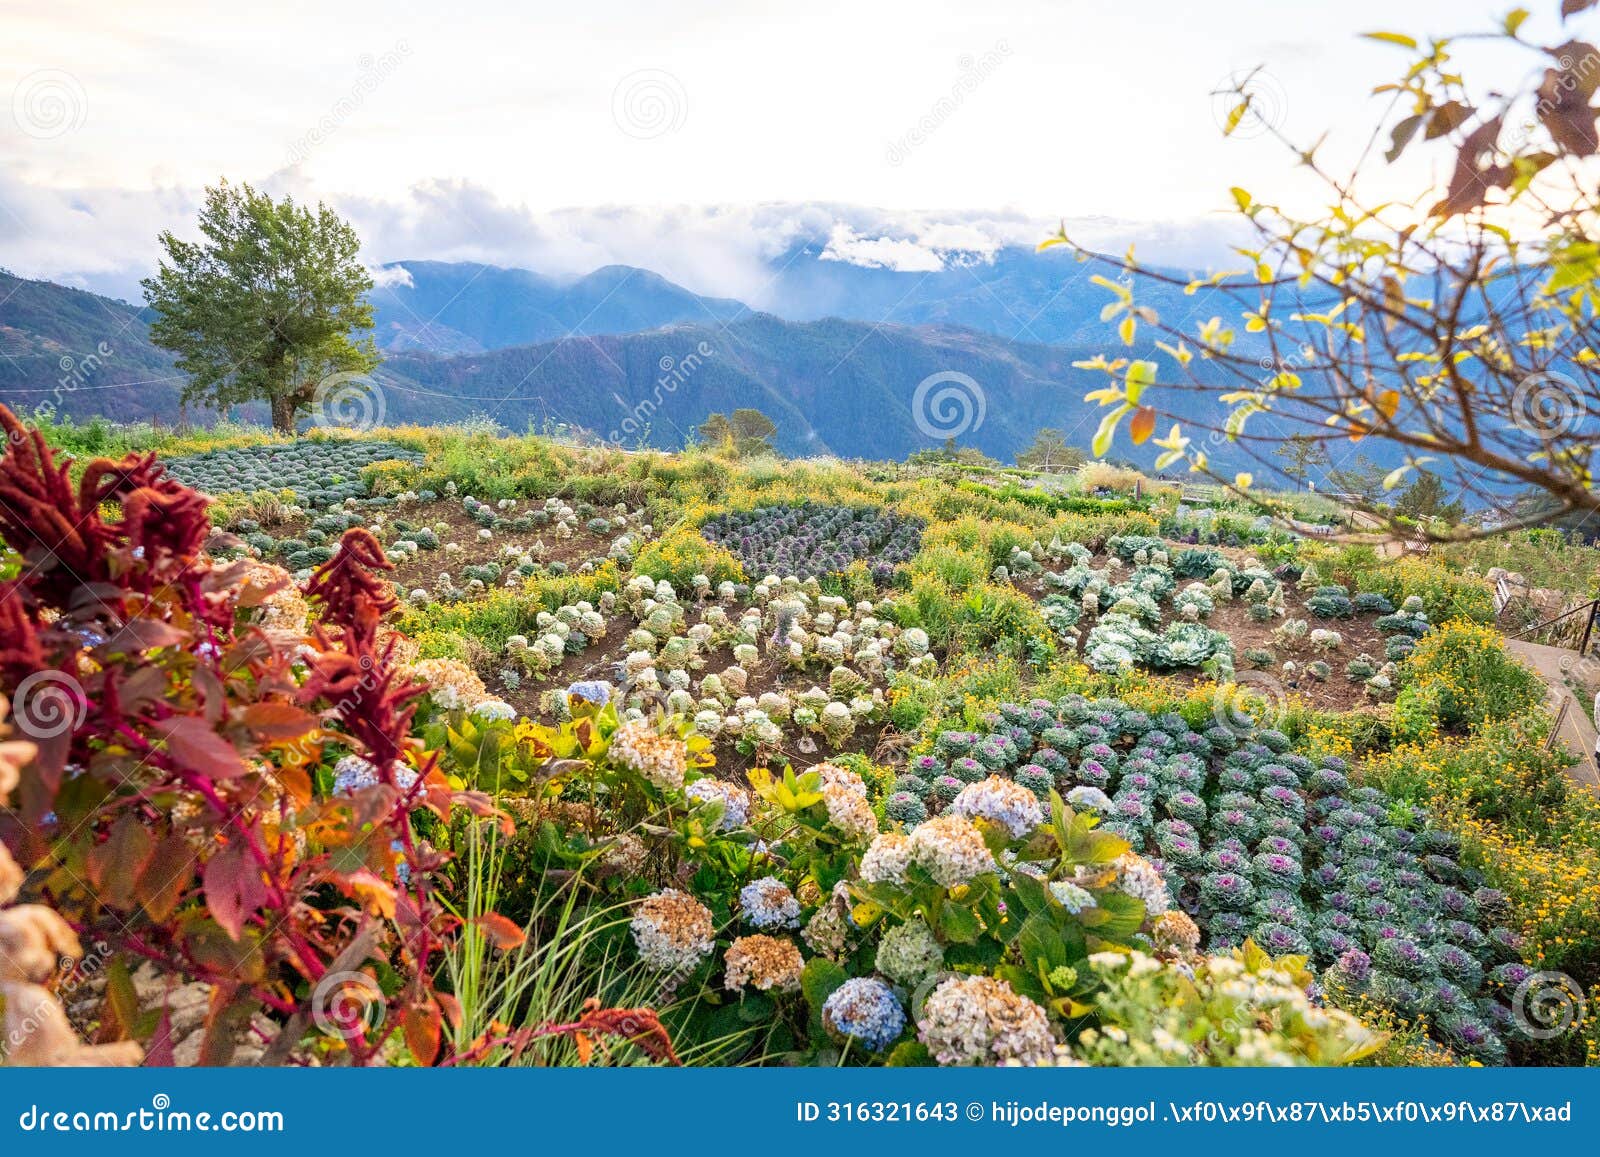 scenic of flower farm at atok, benguet in the mountain province of the philippines